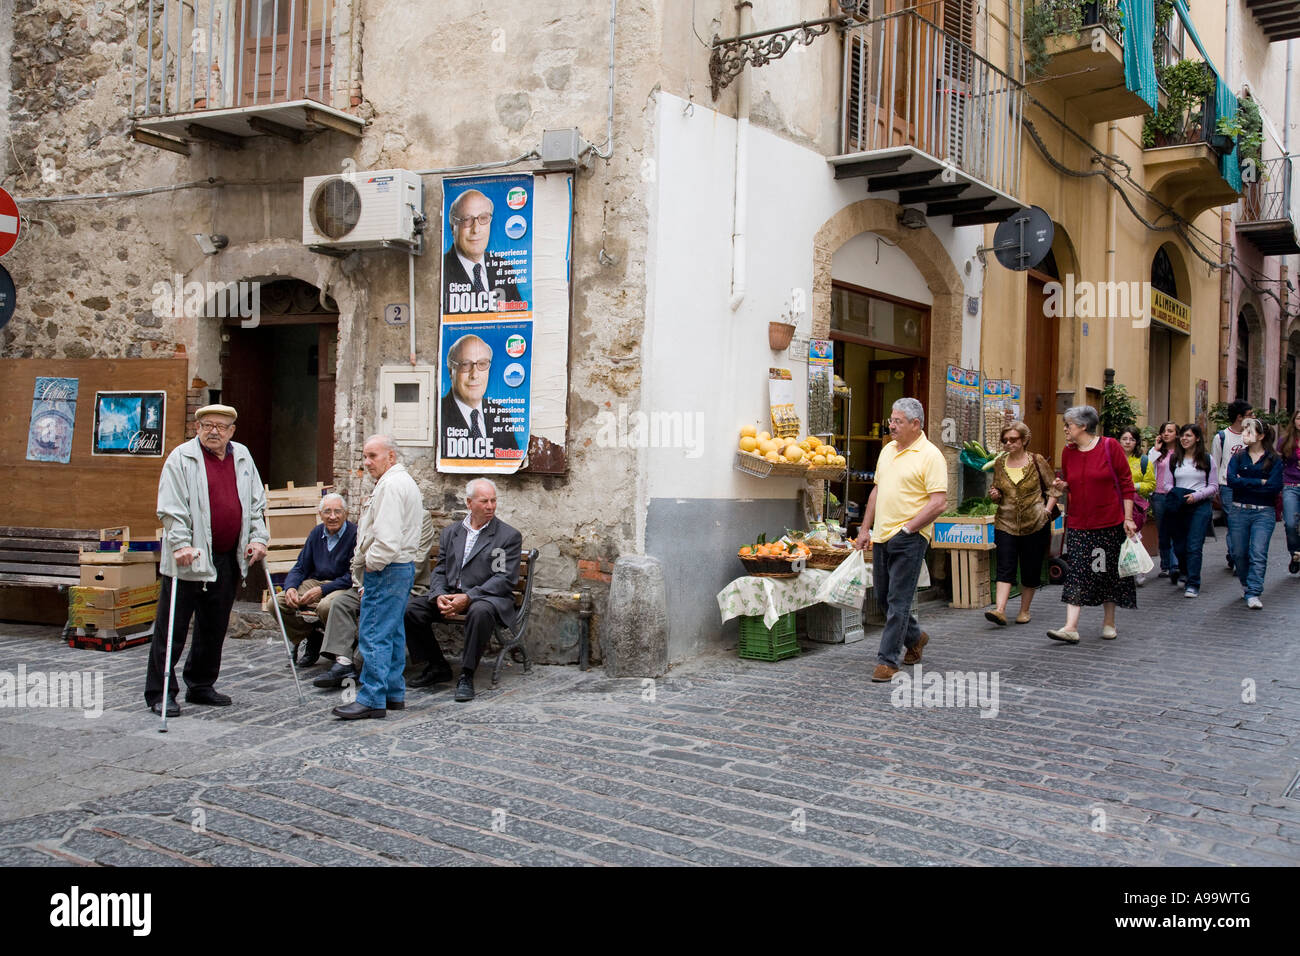 Sicilian men sitting on bench under a political poster in front of alimentari Corso Ruggero Cefalu Sicily Italy Stock Photo